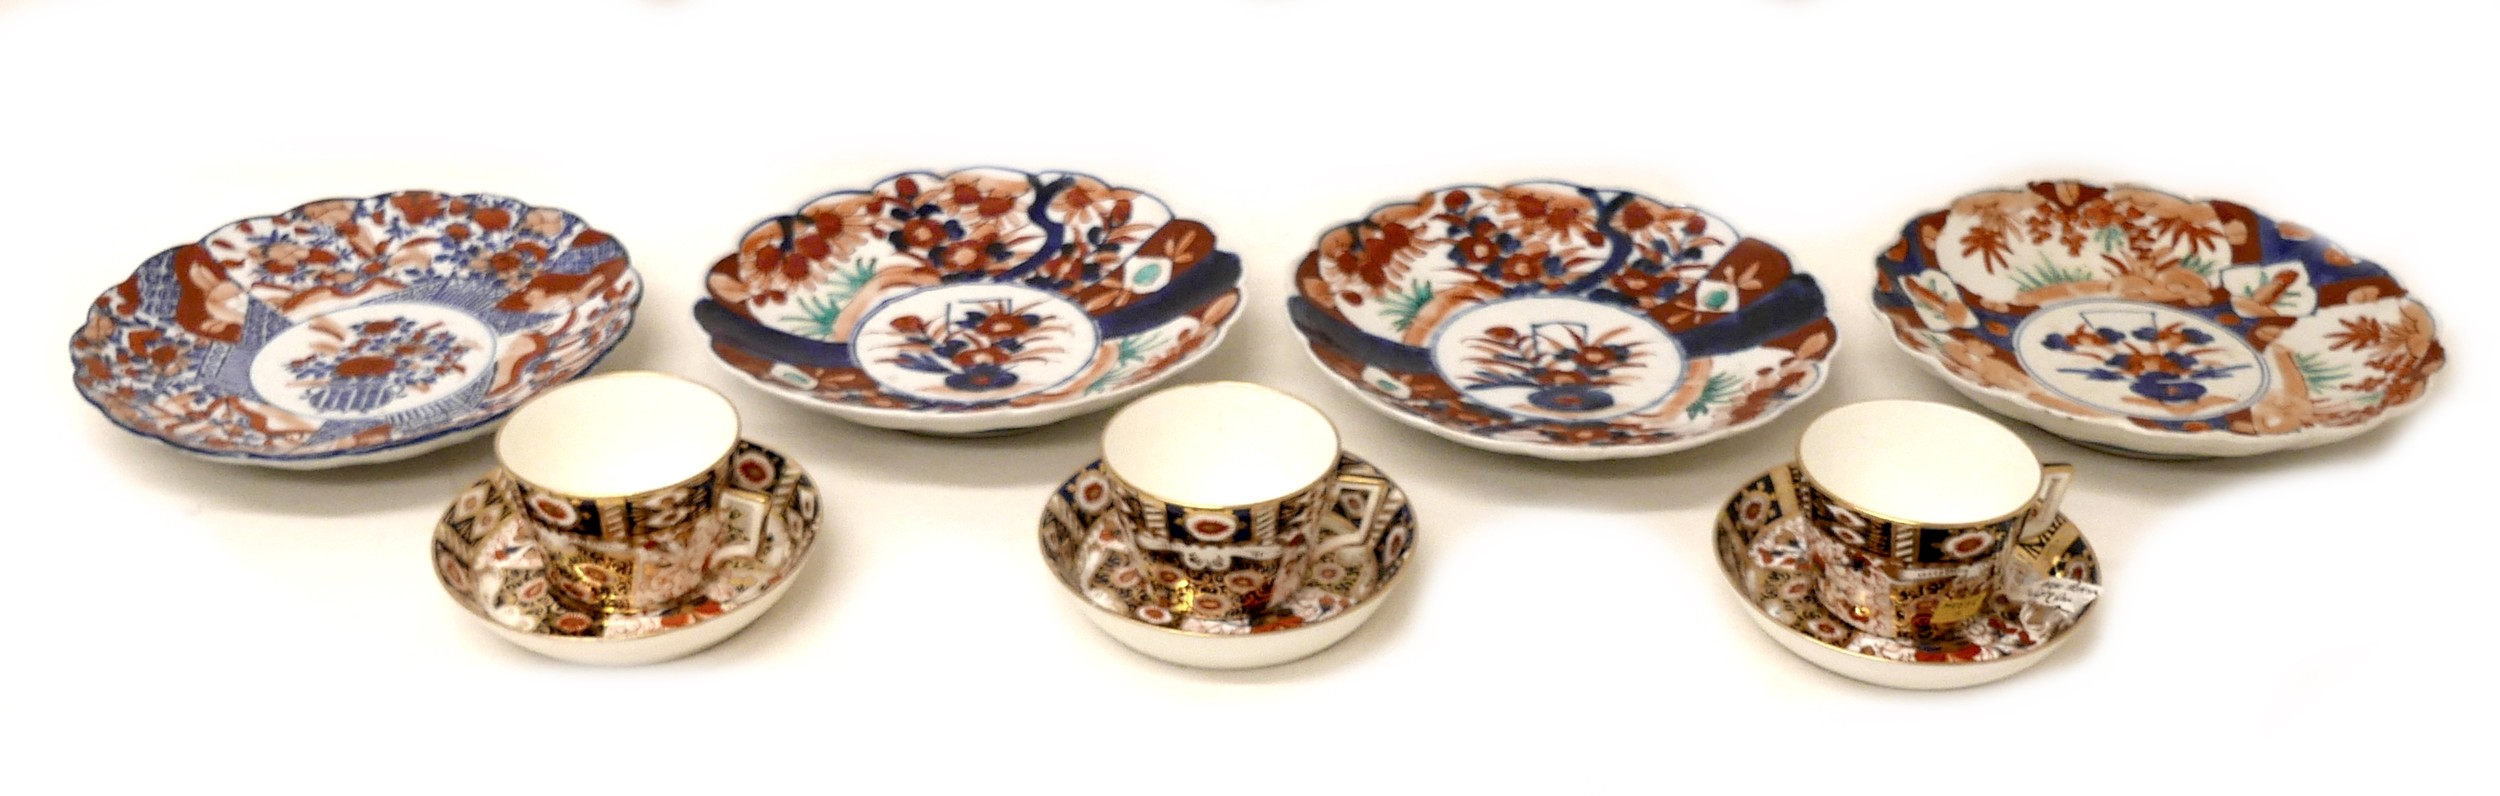 A group of four Japanese 19th century plates, decorated in the Imari palette, with scalloped rims, - Image 3 of 3